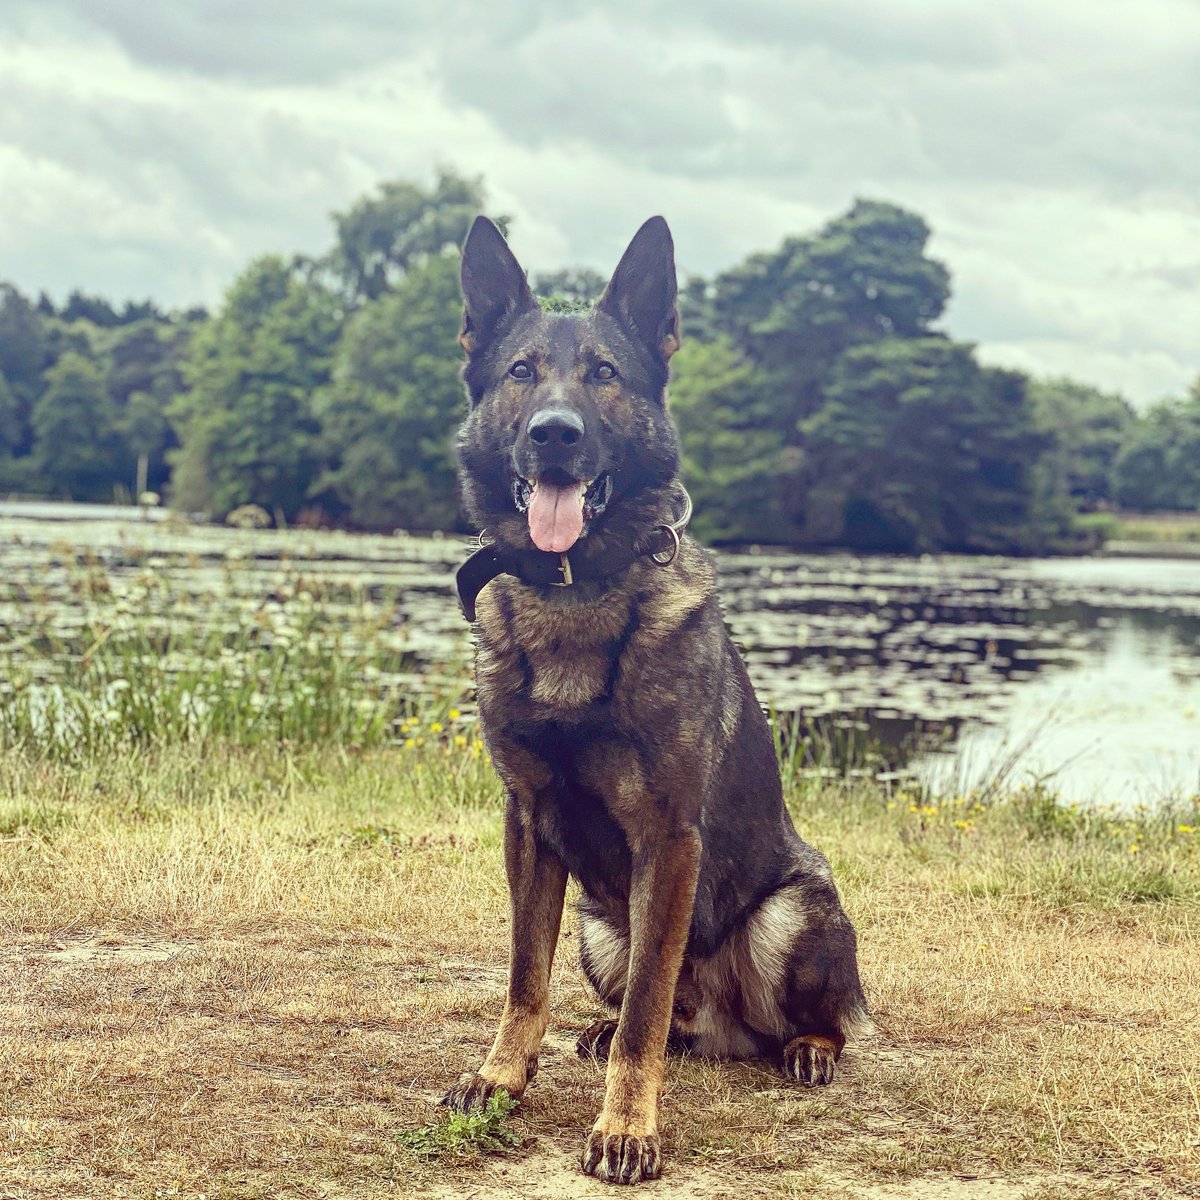 🐾FSD Hooch🐾 Last night two Range Rovers were stolen and located parked unattended. Hooch arrives tracks and locates the key scanner and other evidence. Hooch carried on tracking and located a male suspected of being involved who was hiding. #teamwork @tvprp @TVP_Bracknell